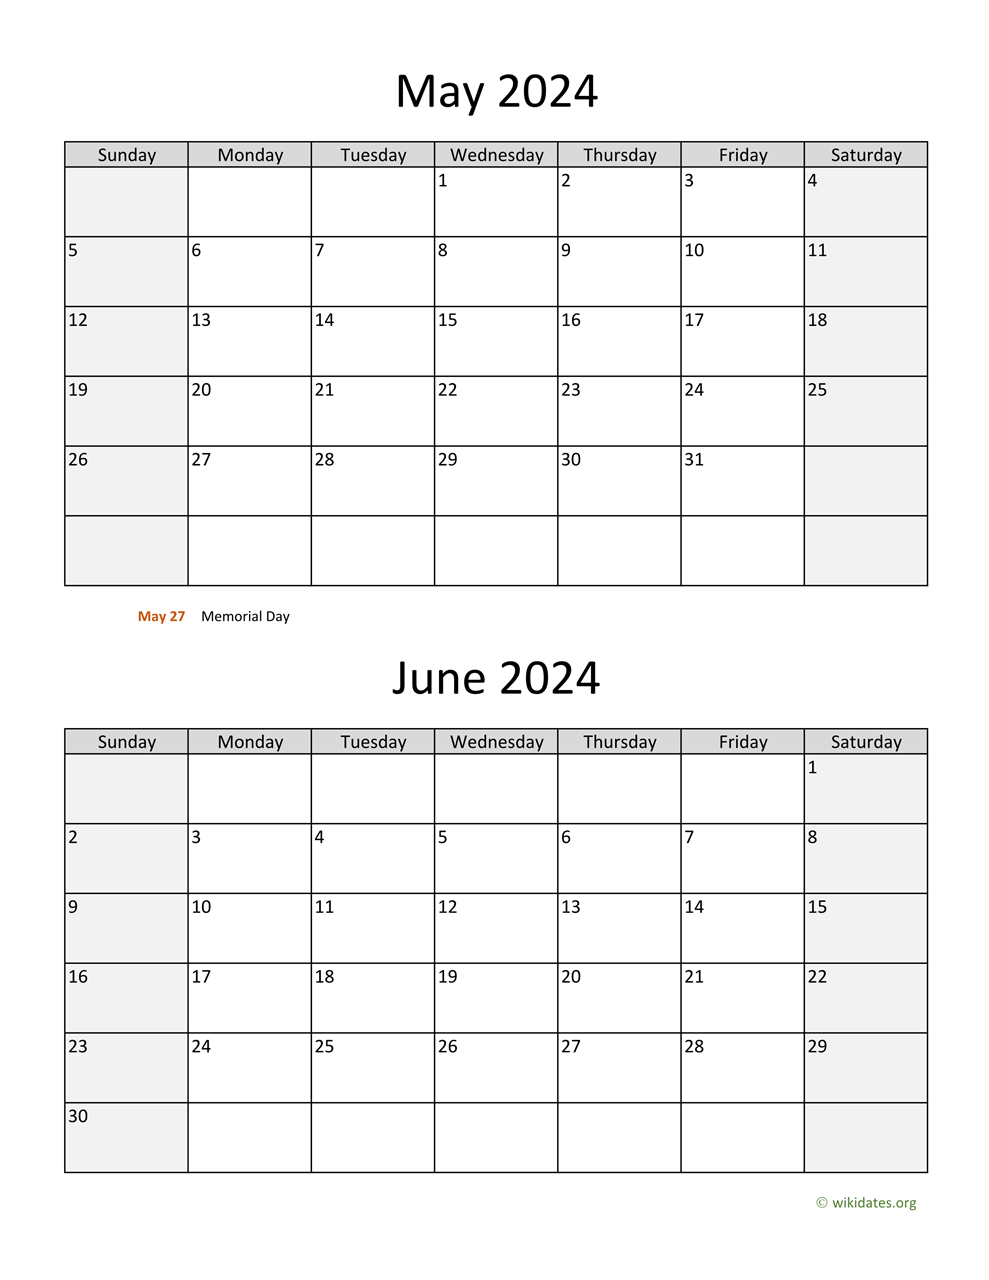 May And June 2024 Calendar | Wikidates for 2024 May And June Calendar Printable